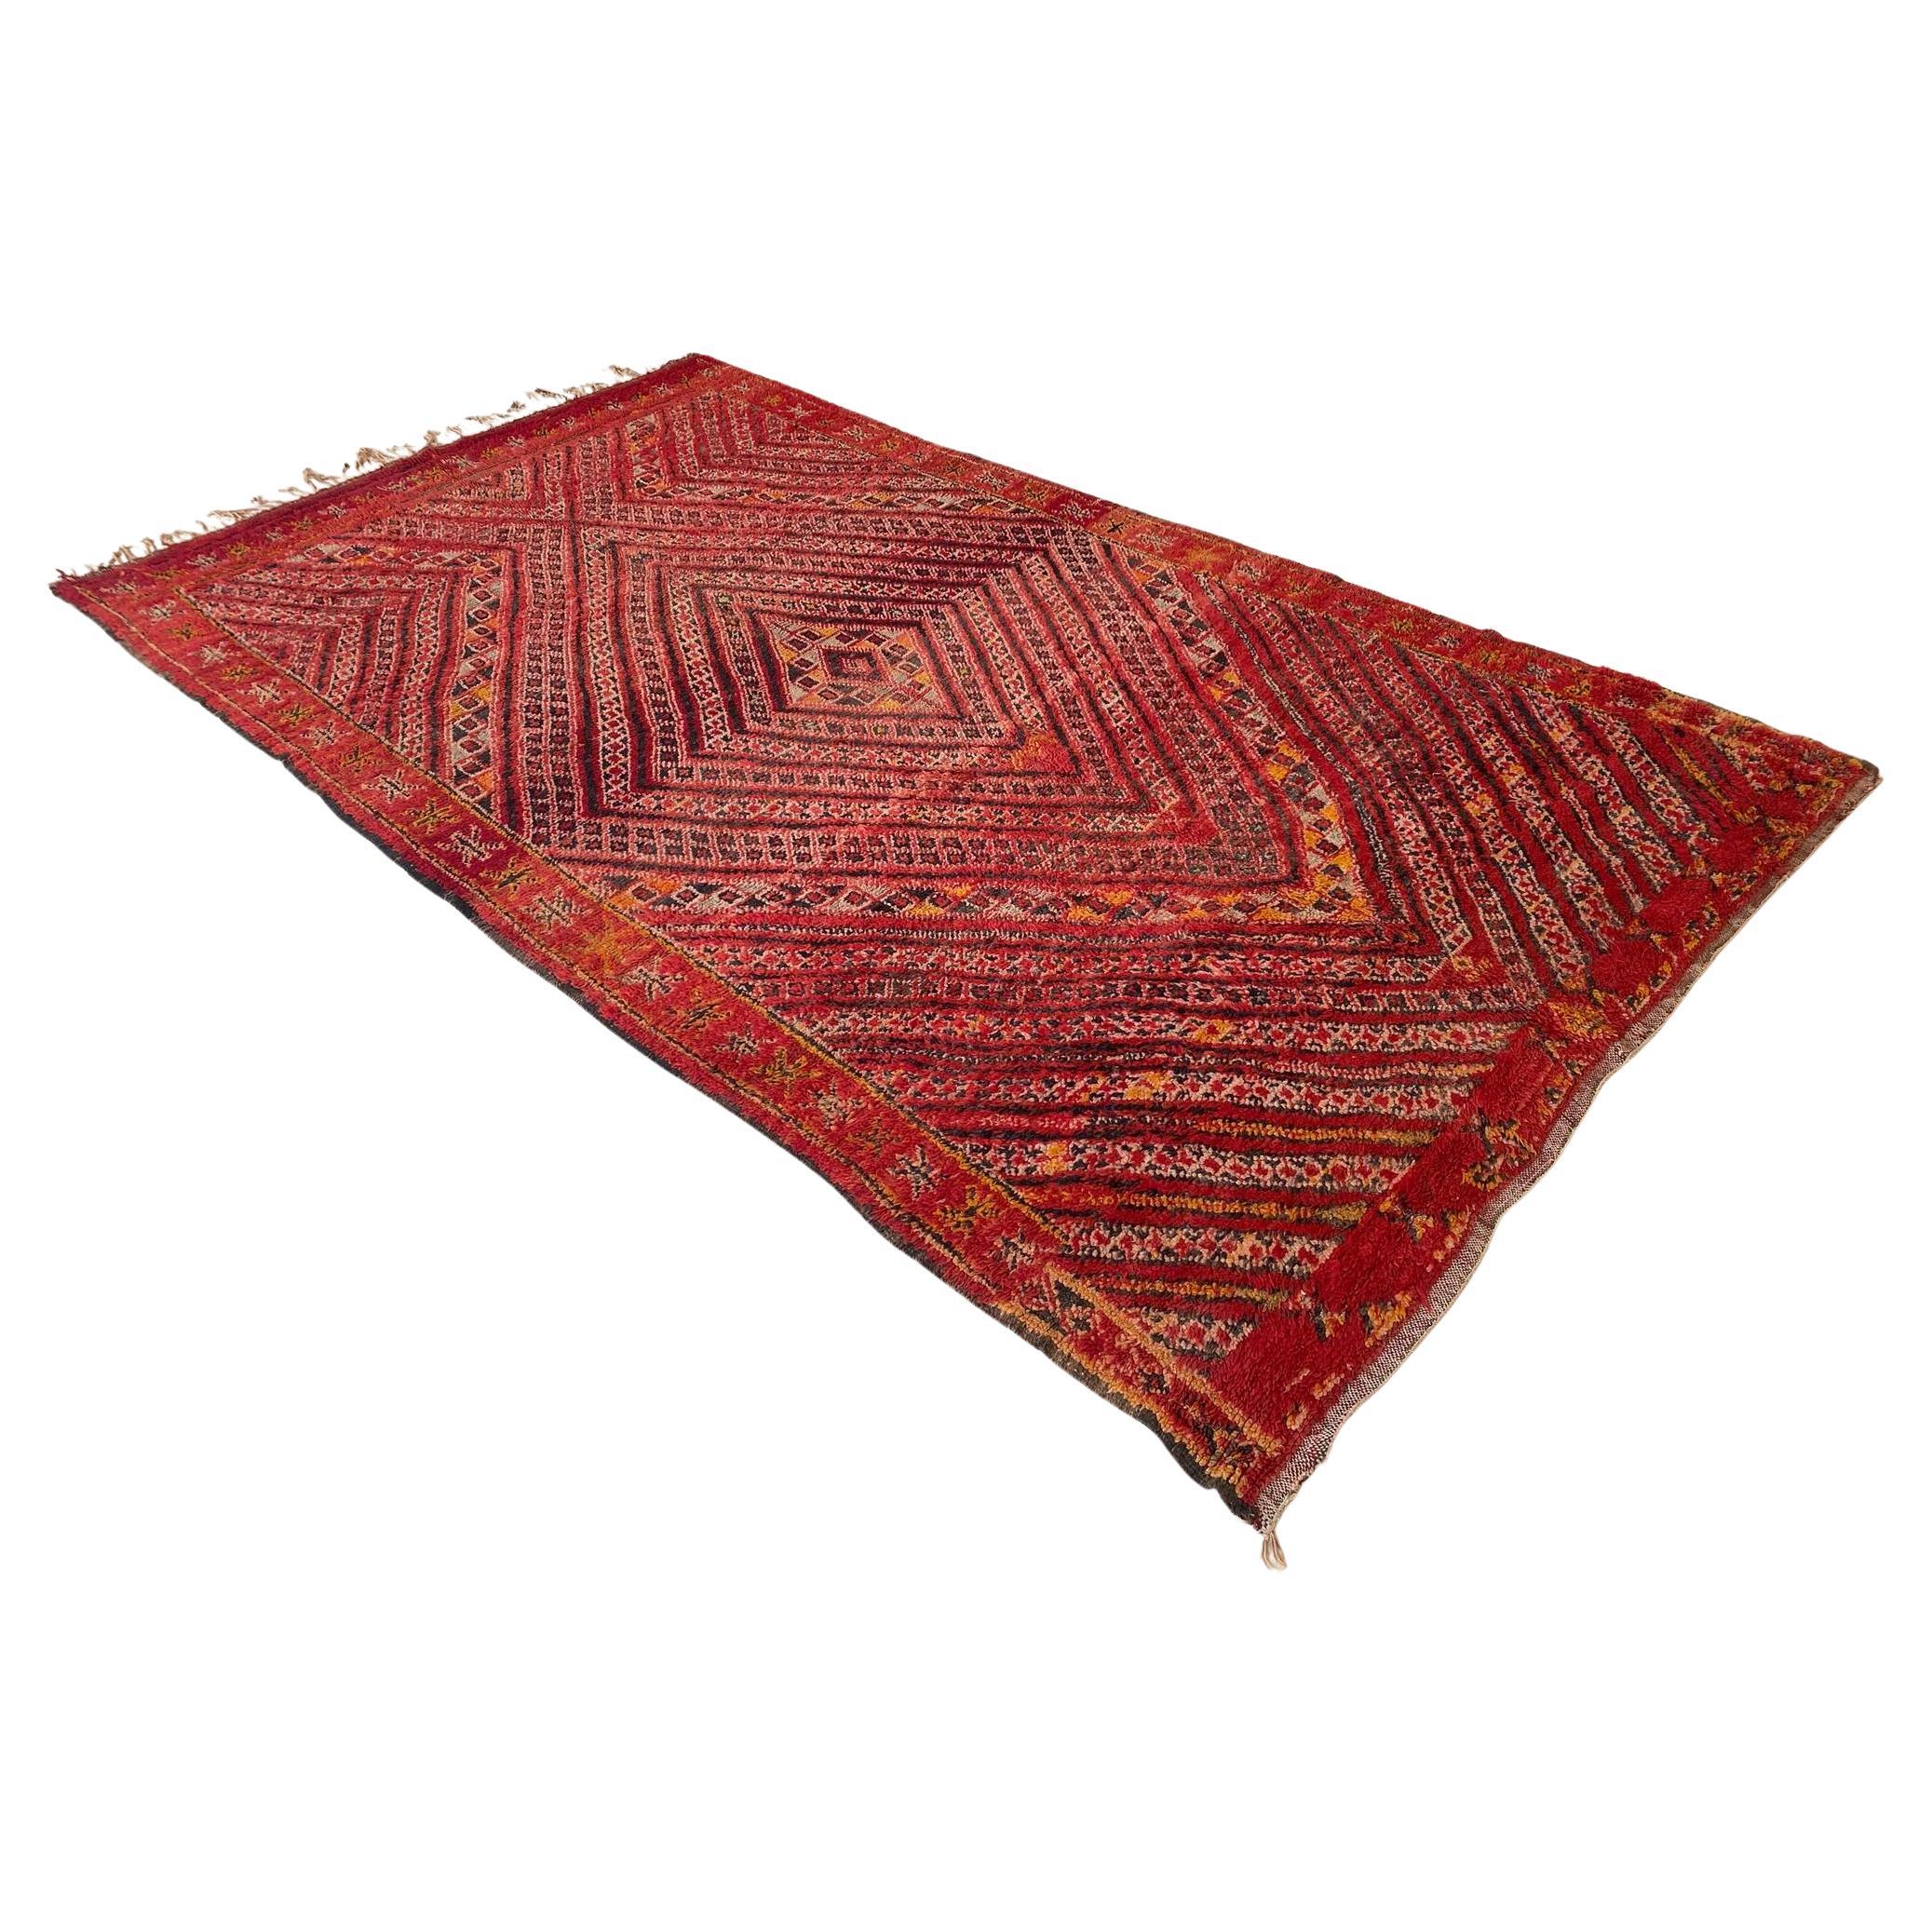 Vintage Moroccan Zayane rug - Red - 6.7x11.3feet / 205x344cm For Sale